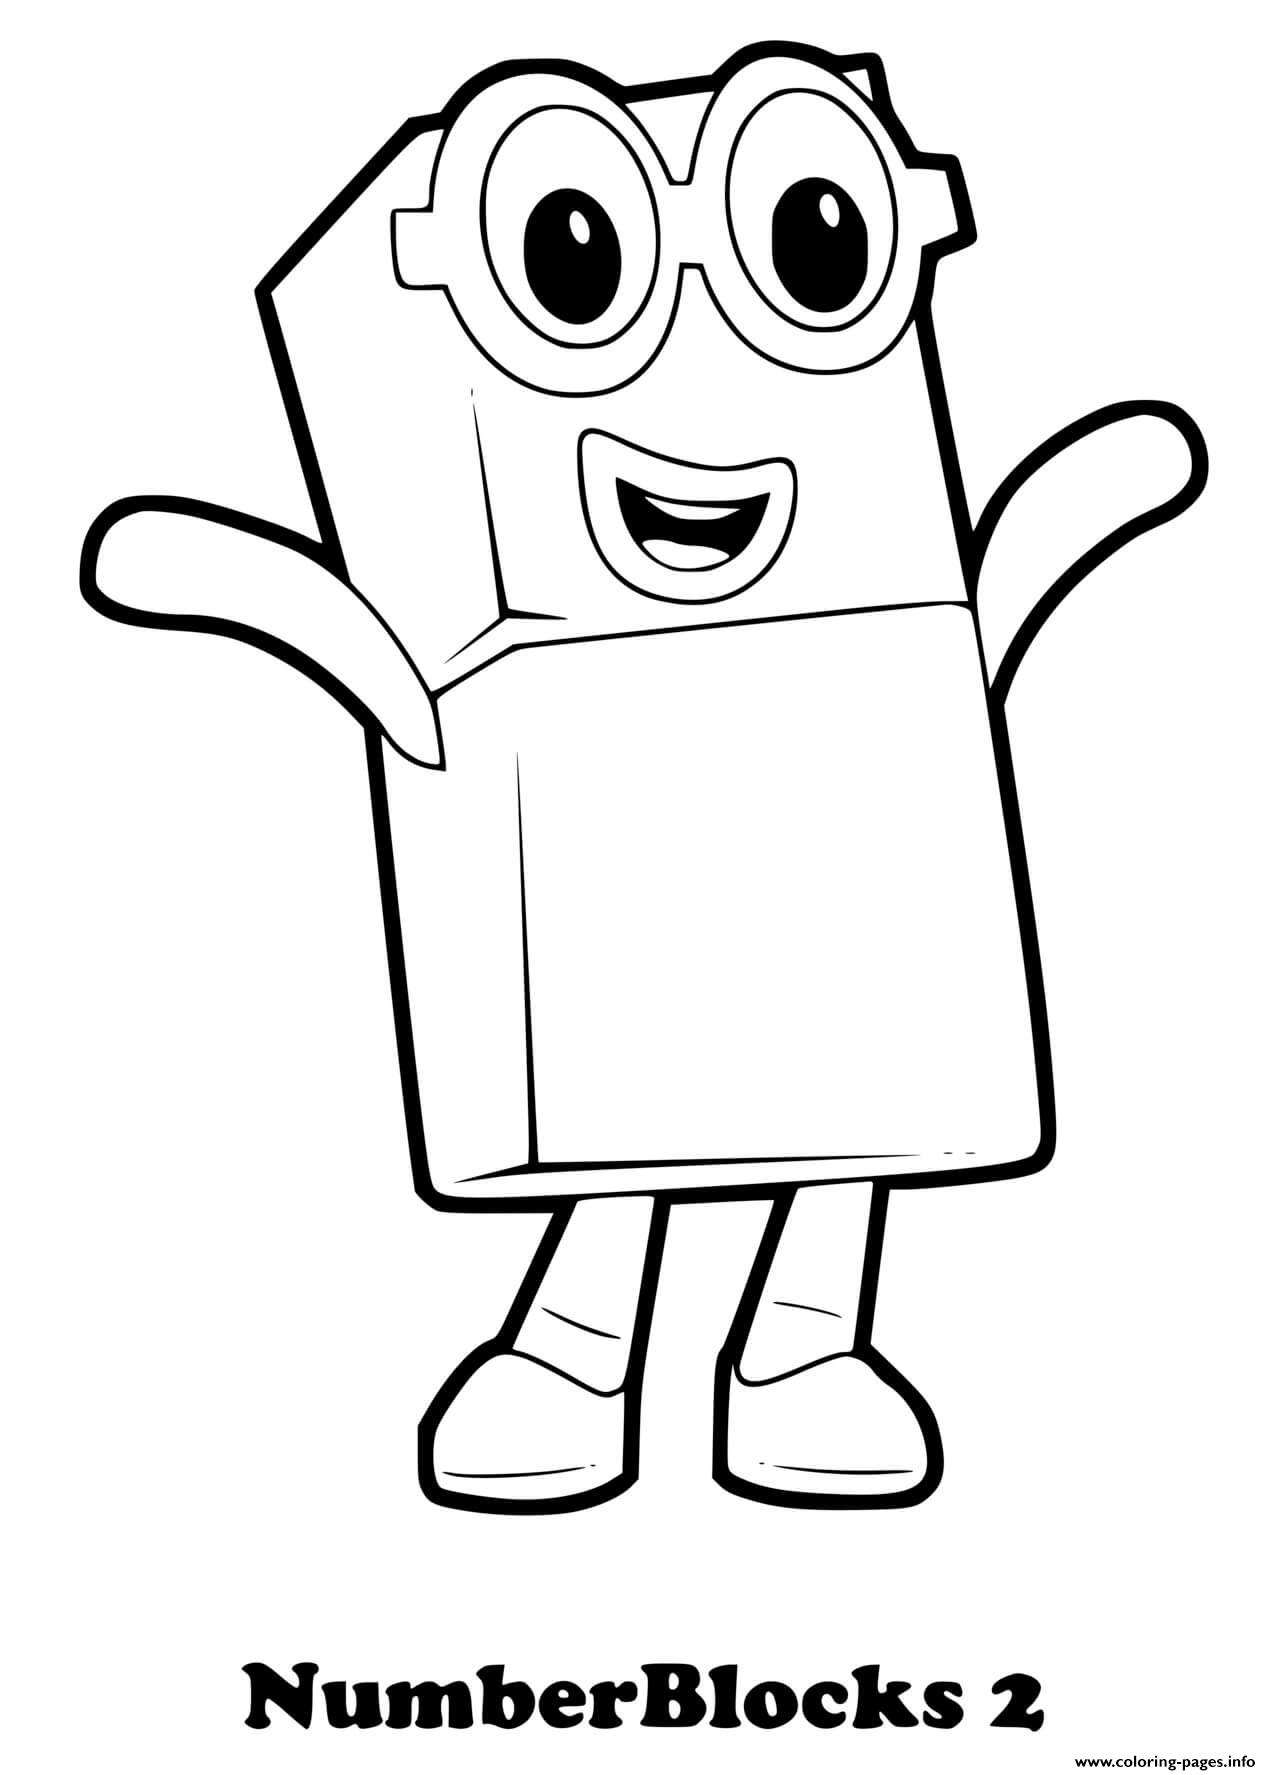 Numberblocks 2 Two Coloring Pages Printable